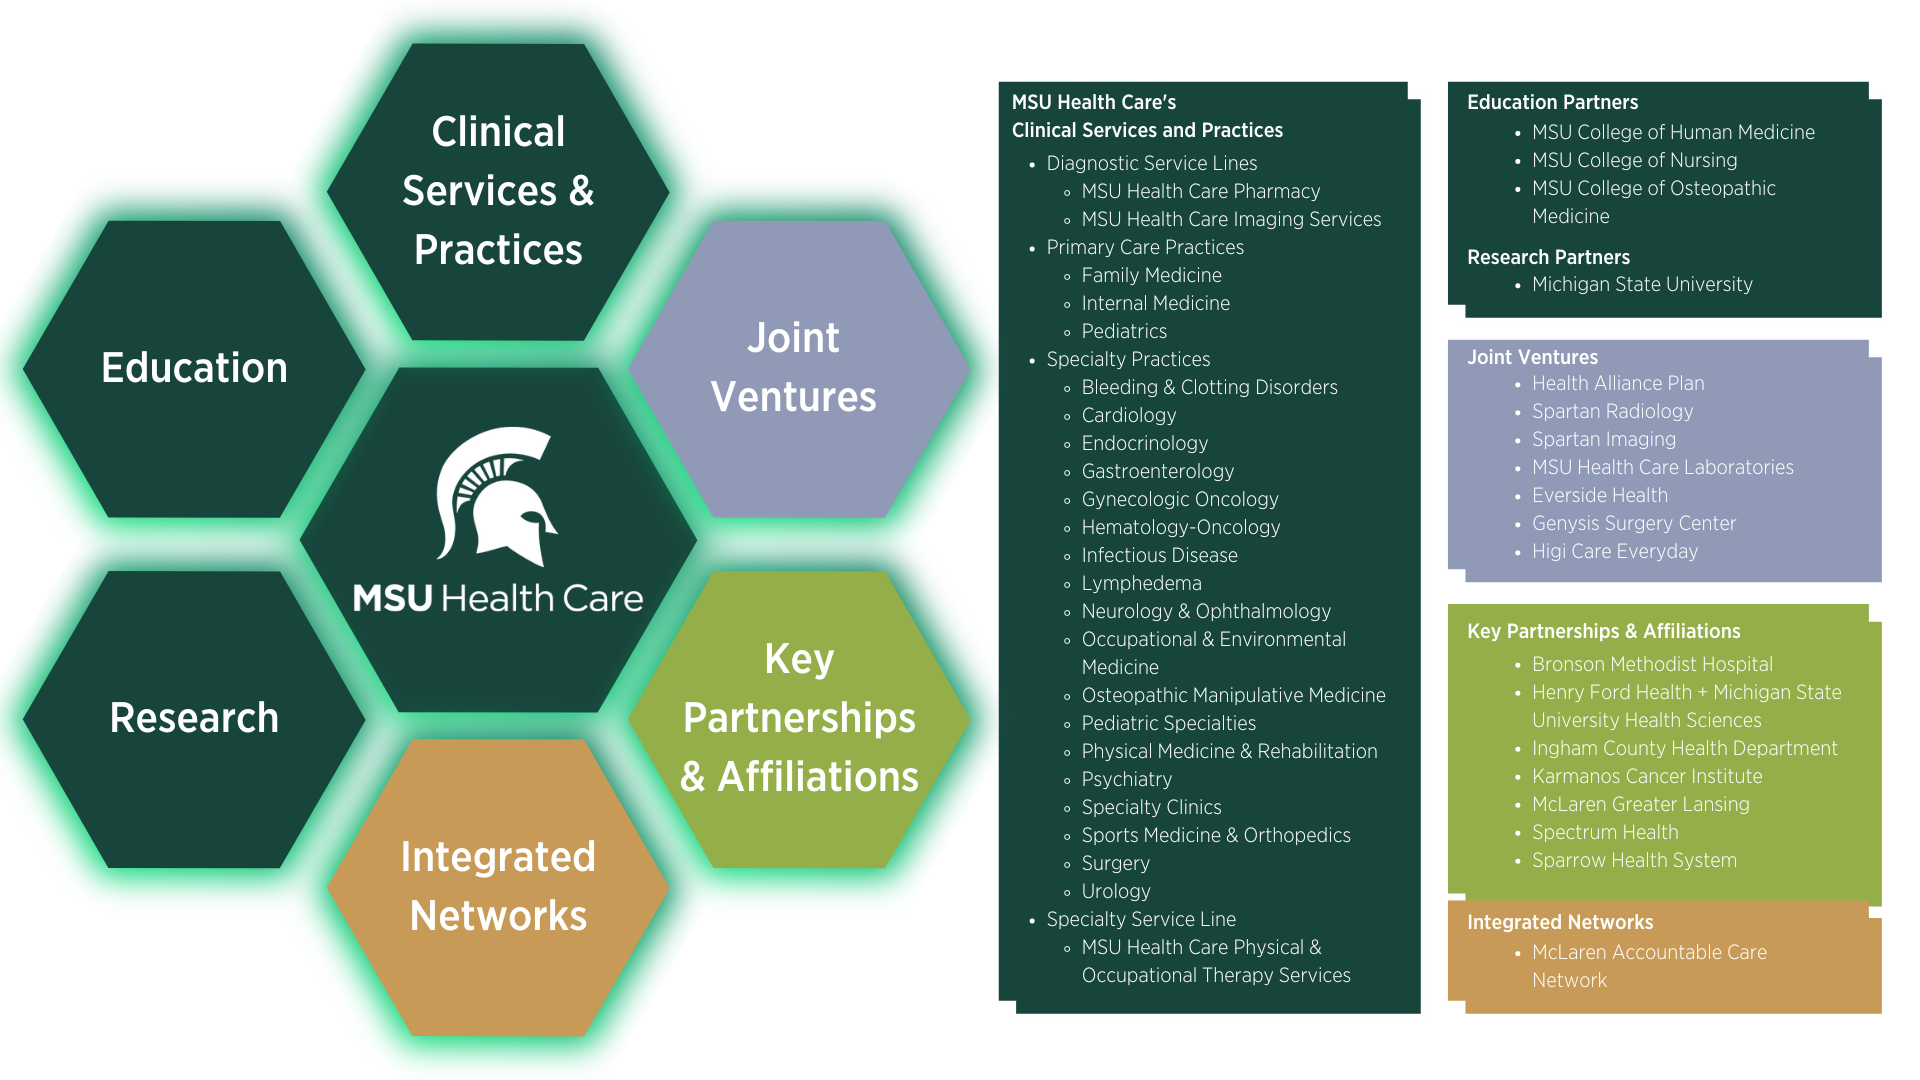 msu health care list of academic, research and clinical partnerships